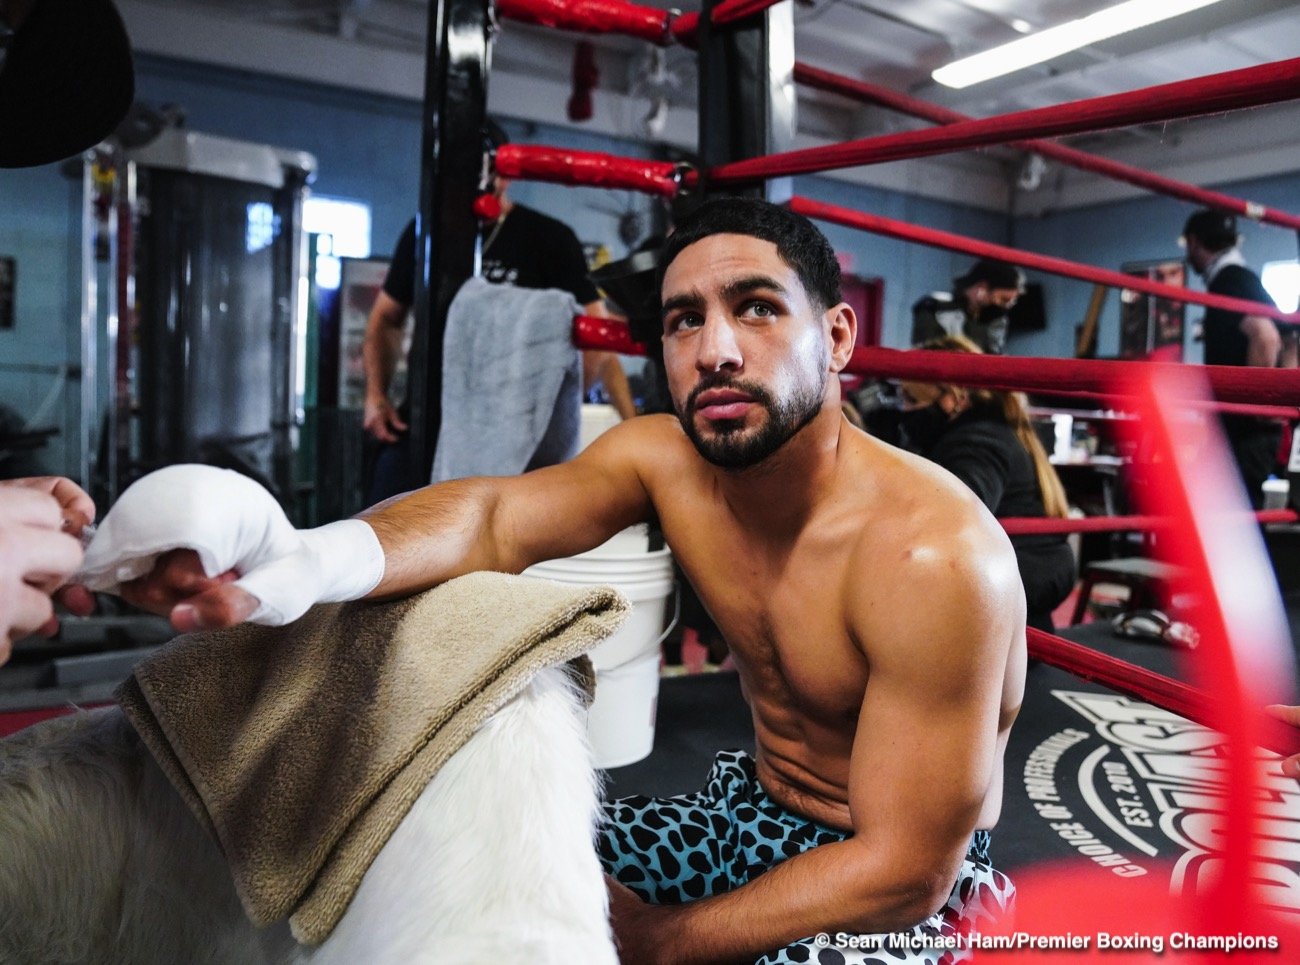 Image: Danny Garcia to Crawford: "I'm rich, bro. I don't need to fight you"